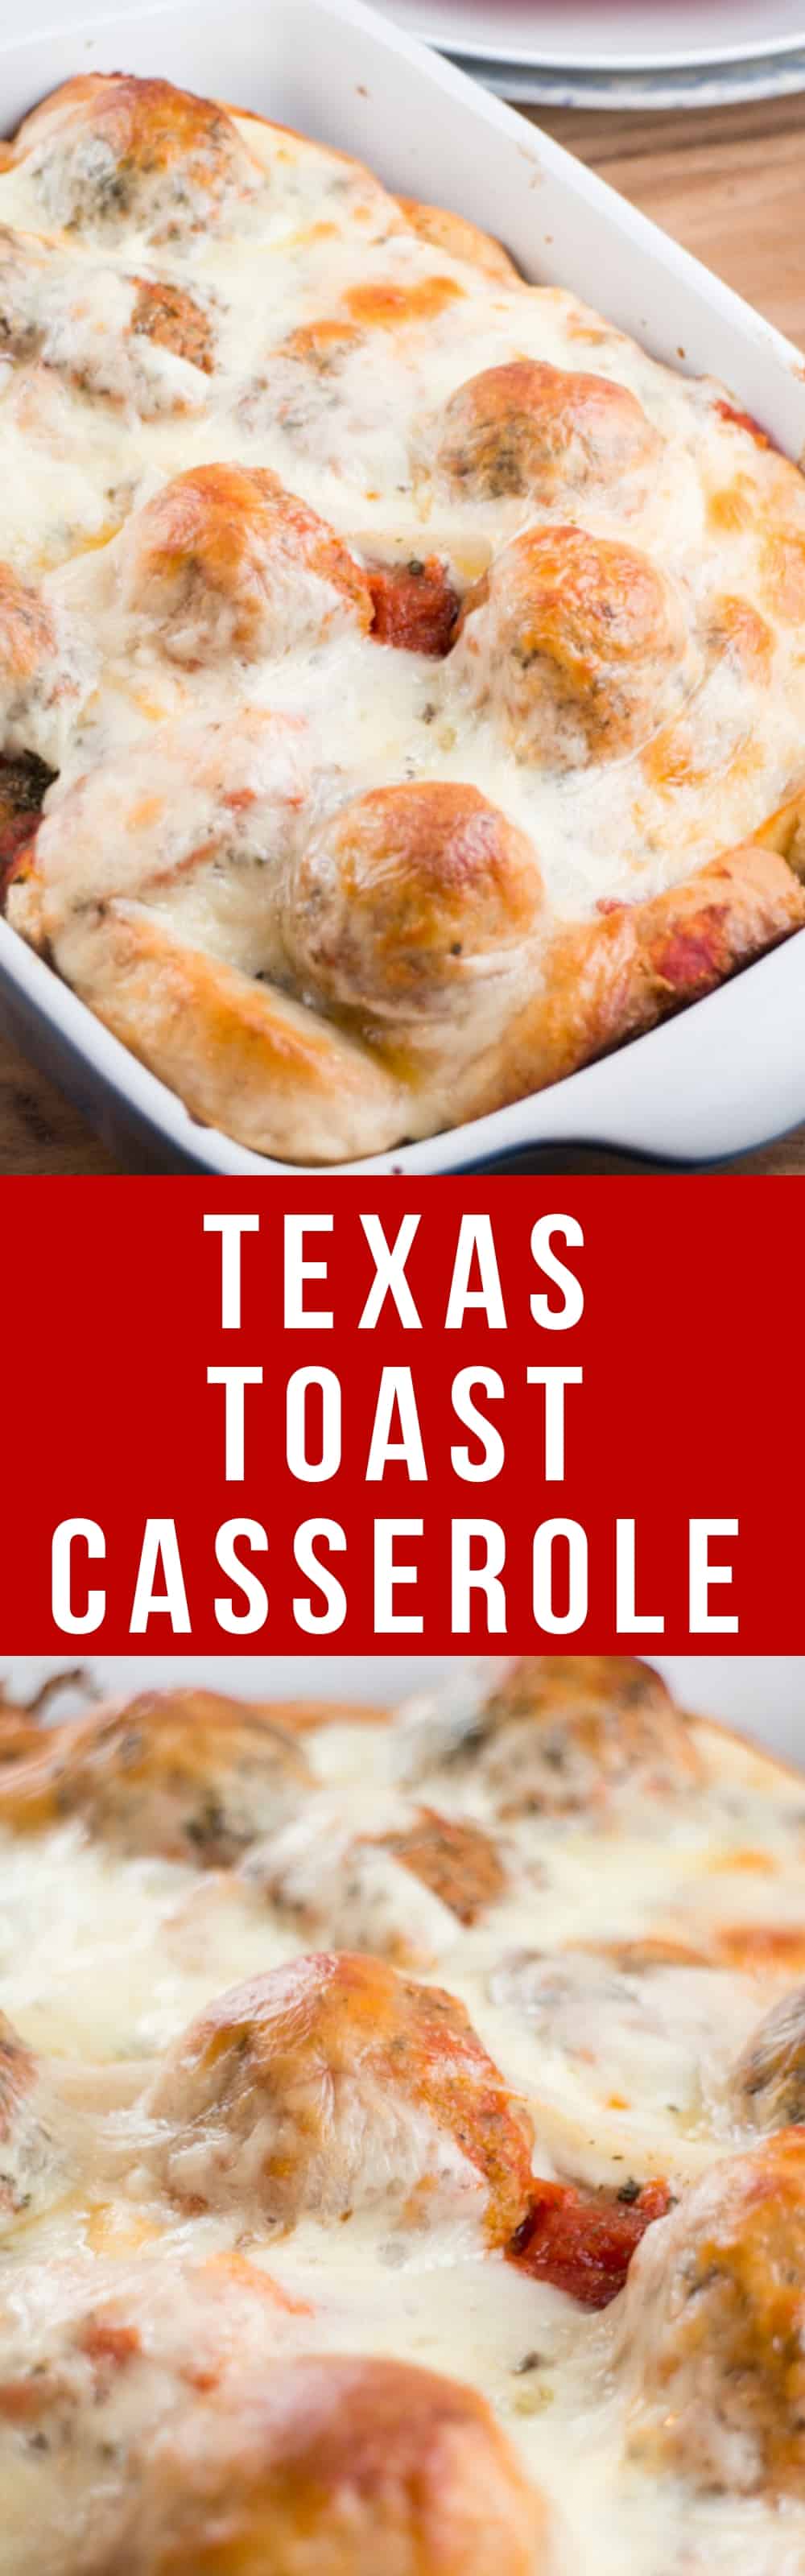 This Cheesy Meatball Texas Toast Casserole takes less than 30 minutes to create. With just 4 ingredients and one pan, it isn’t a regular family favorite on our table but this is my cheat meal when it comes to easy dinner recipes. The best part is everyone wants a second helping!